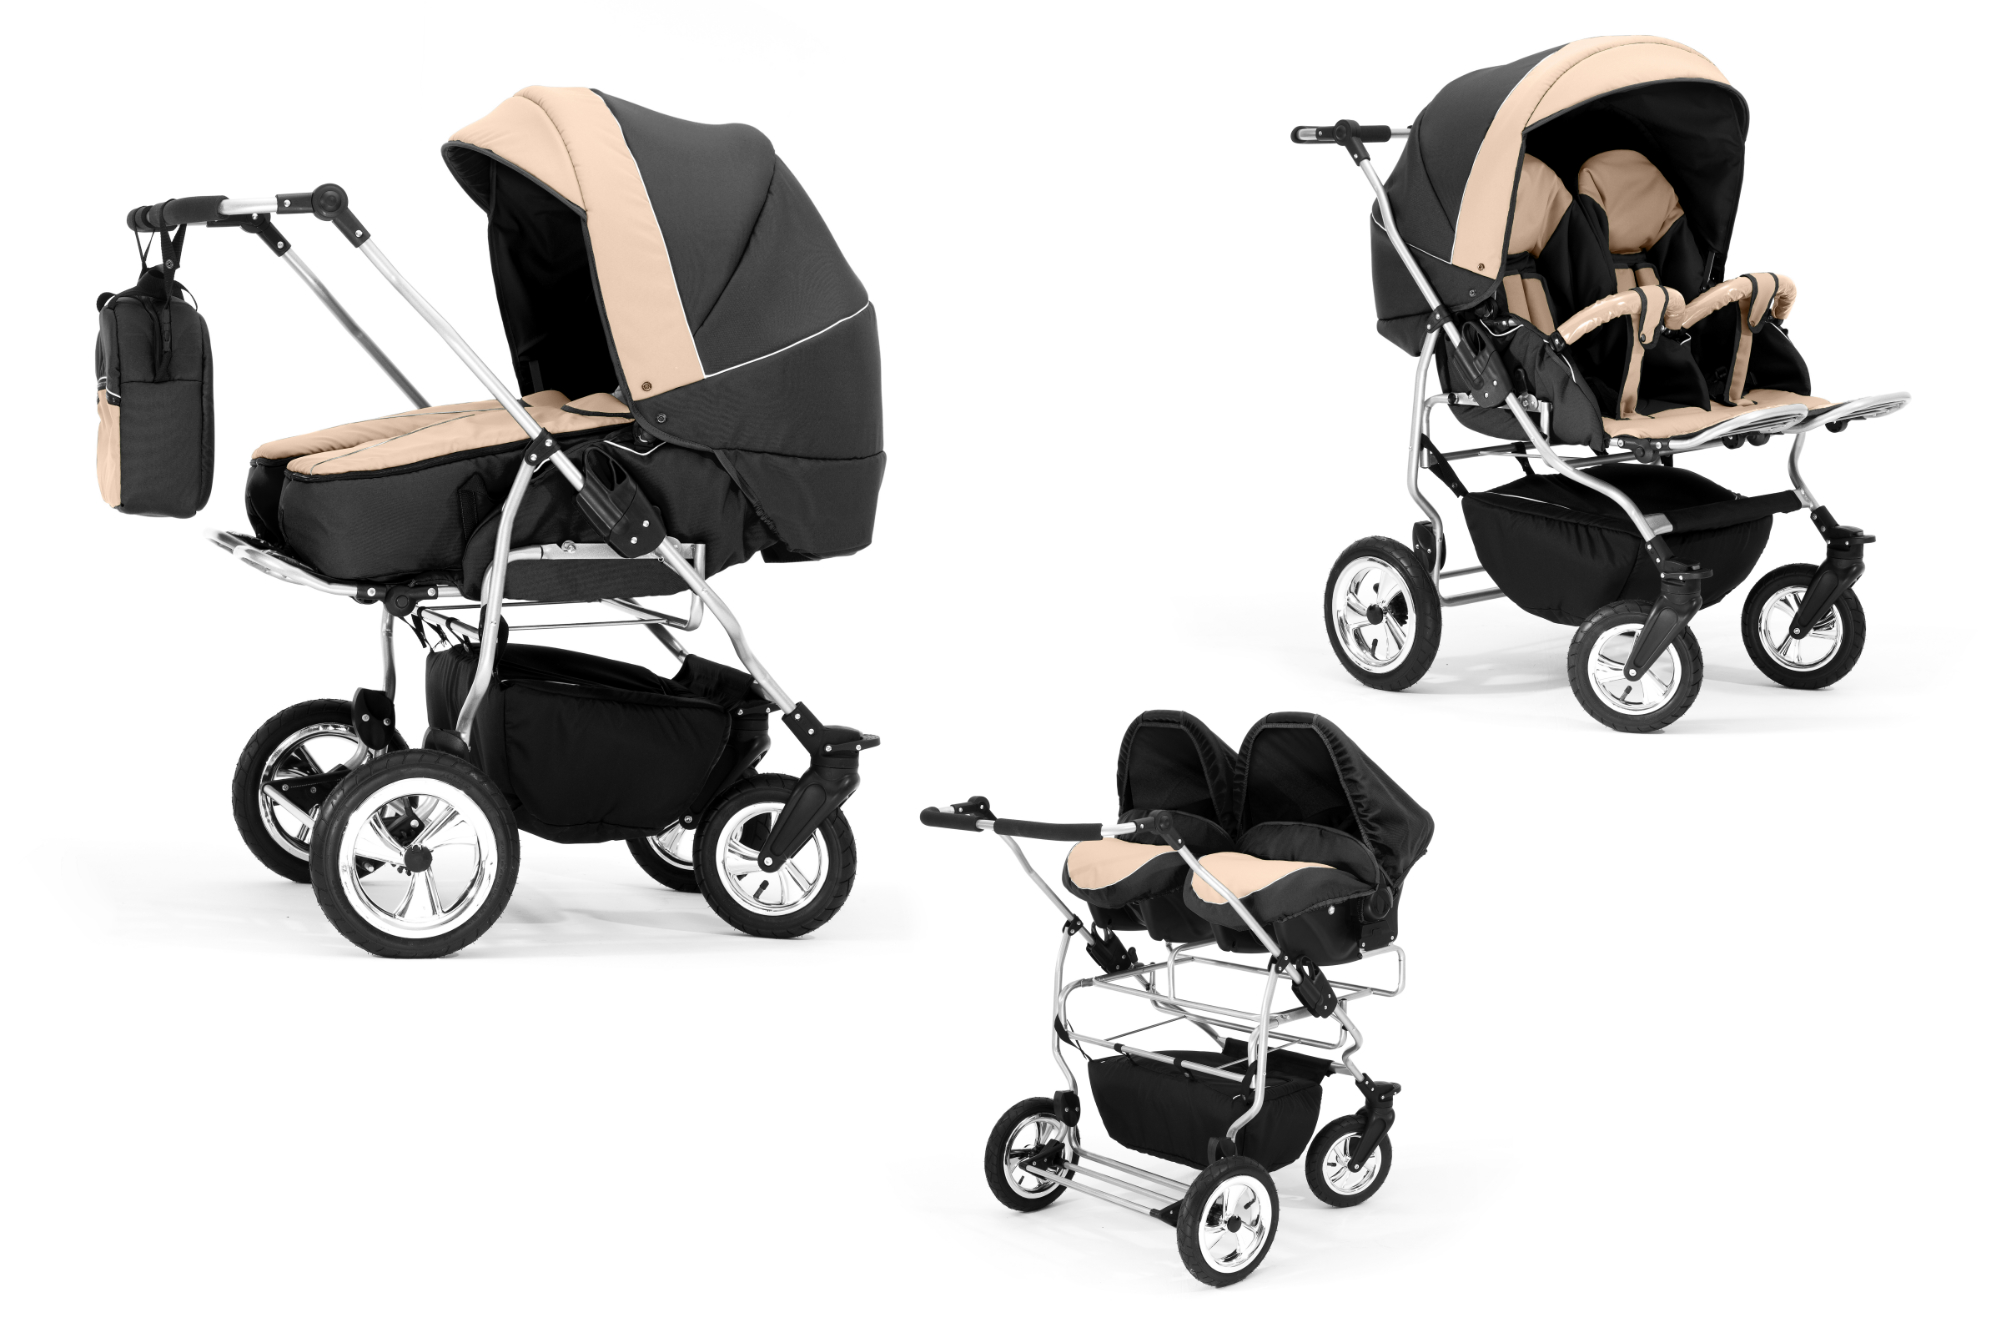 Twin Pram 3in1 Pushchair Double Buggy Twins - 68 COLORS!!! | eBay